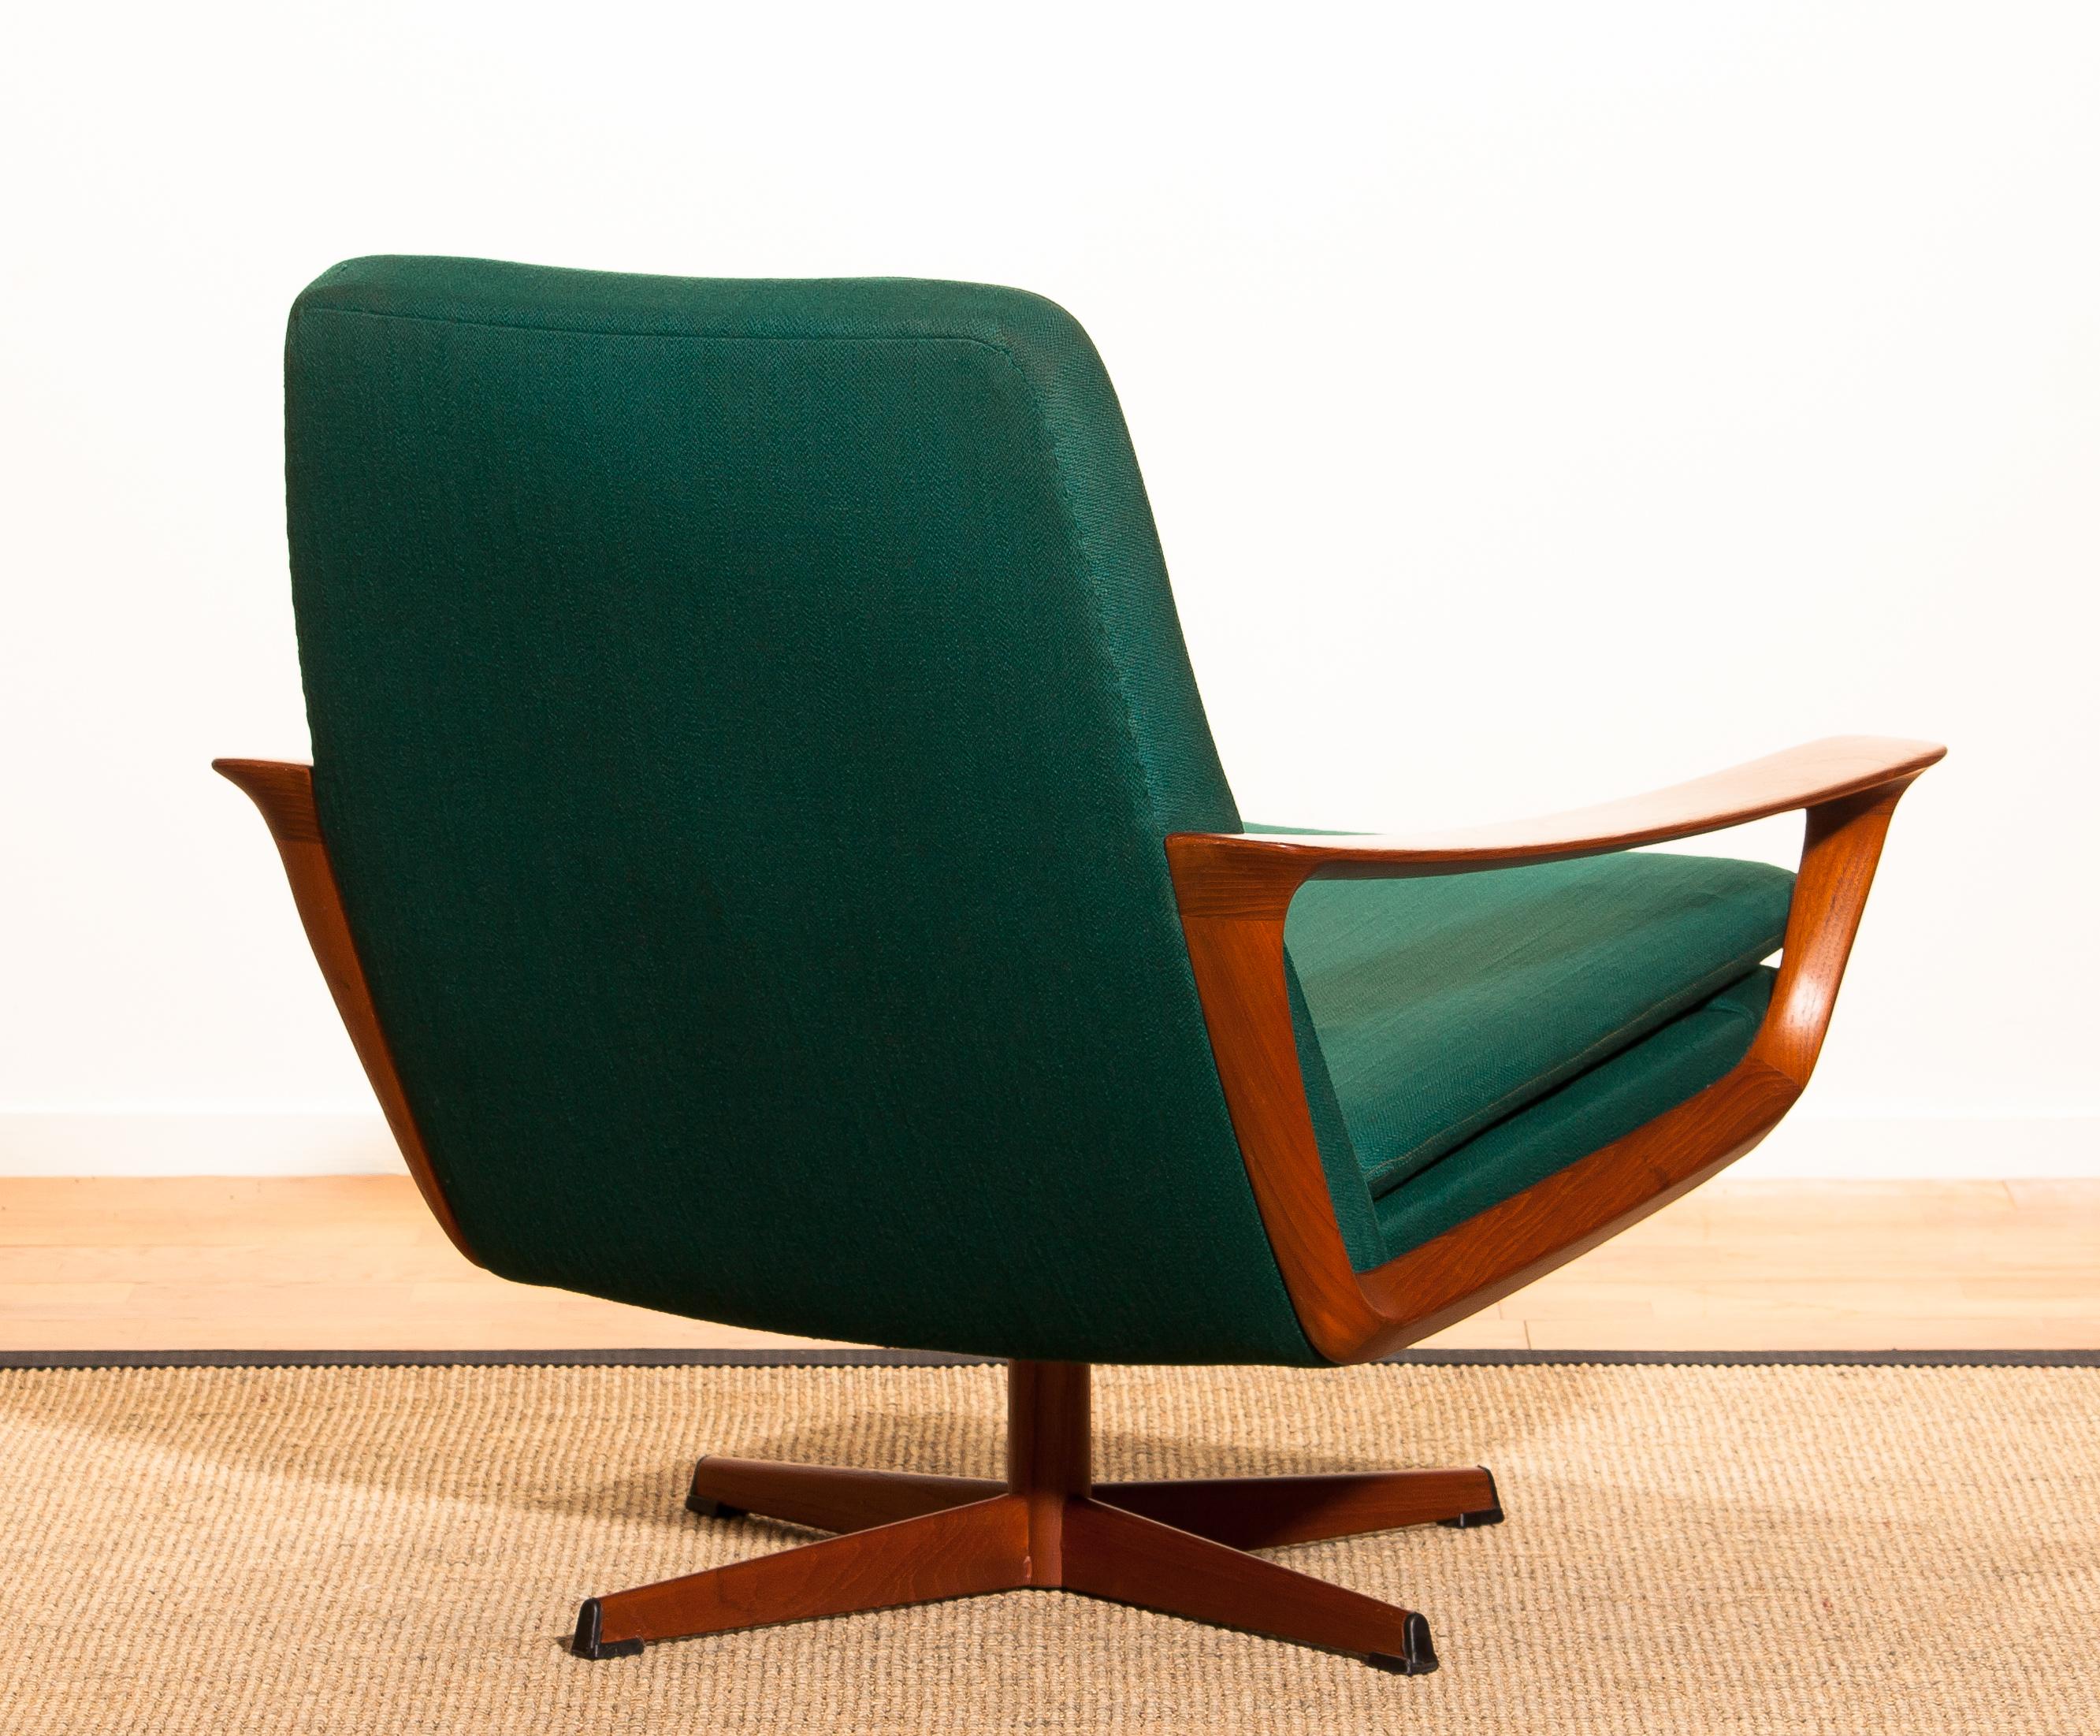 Teak Set of Two Swivel Chairs by Johannes Andersson for Trensums Denmark, 1960 In Good Condition In Silvolde, Gelderland